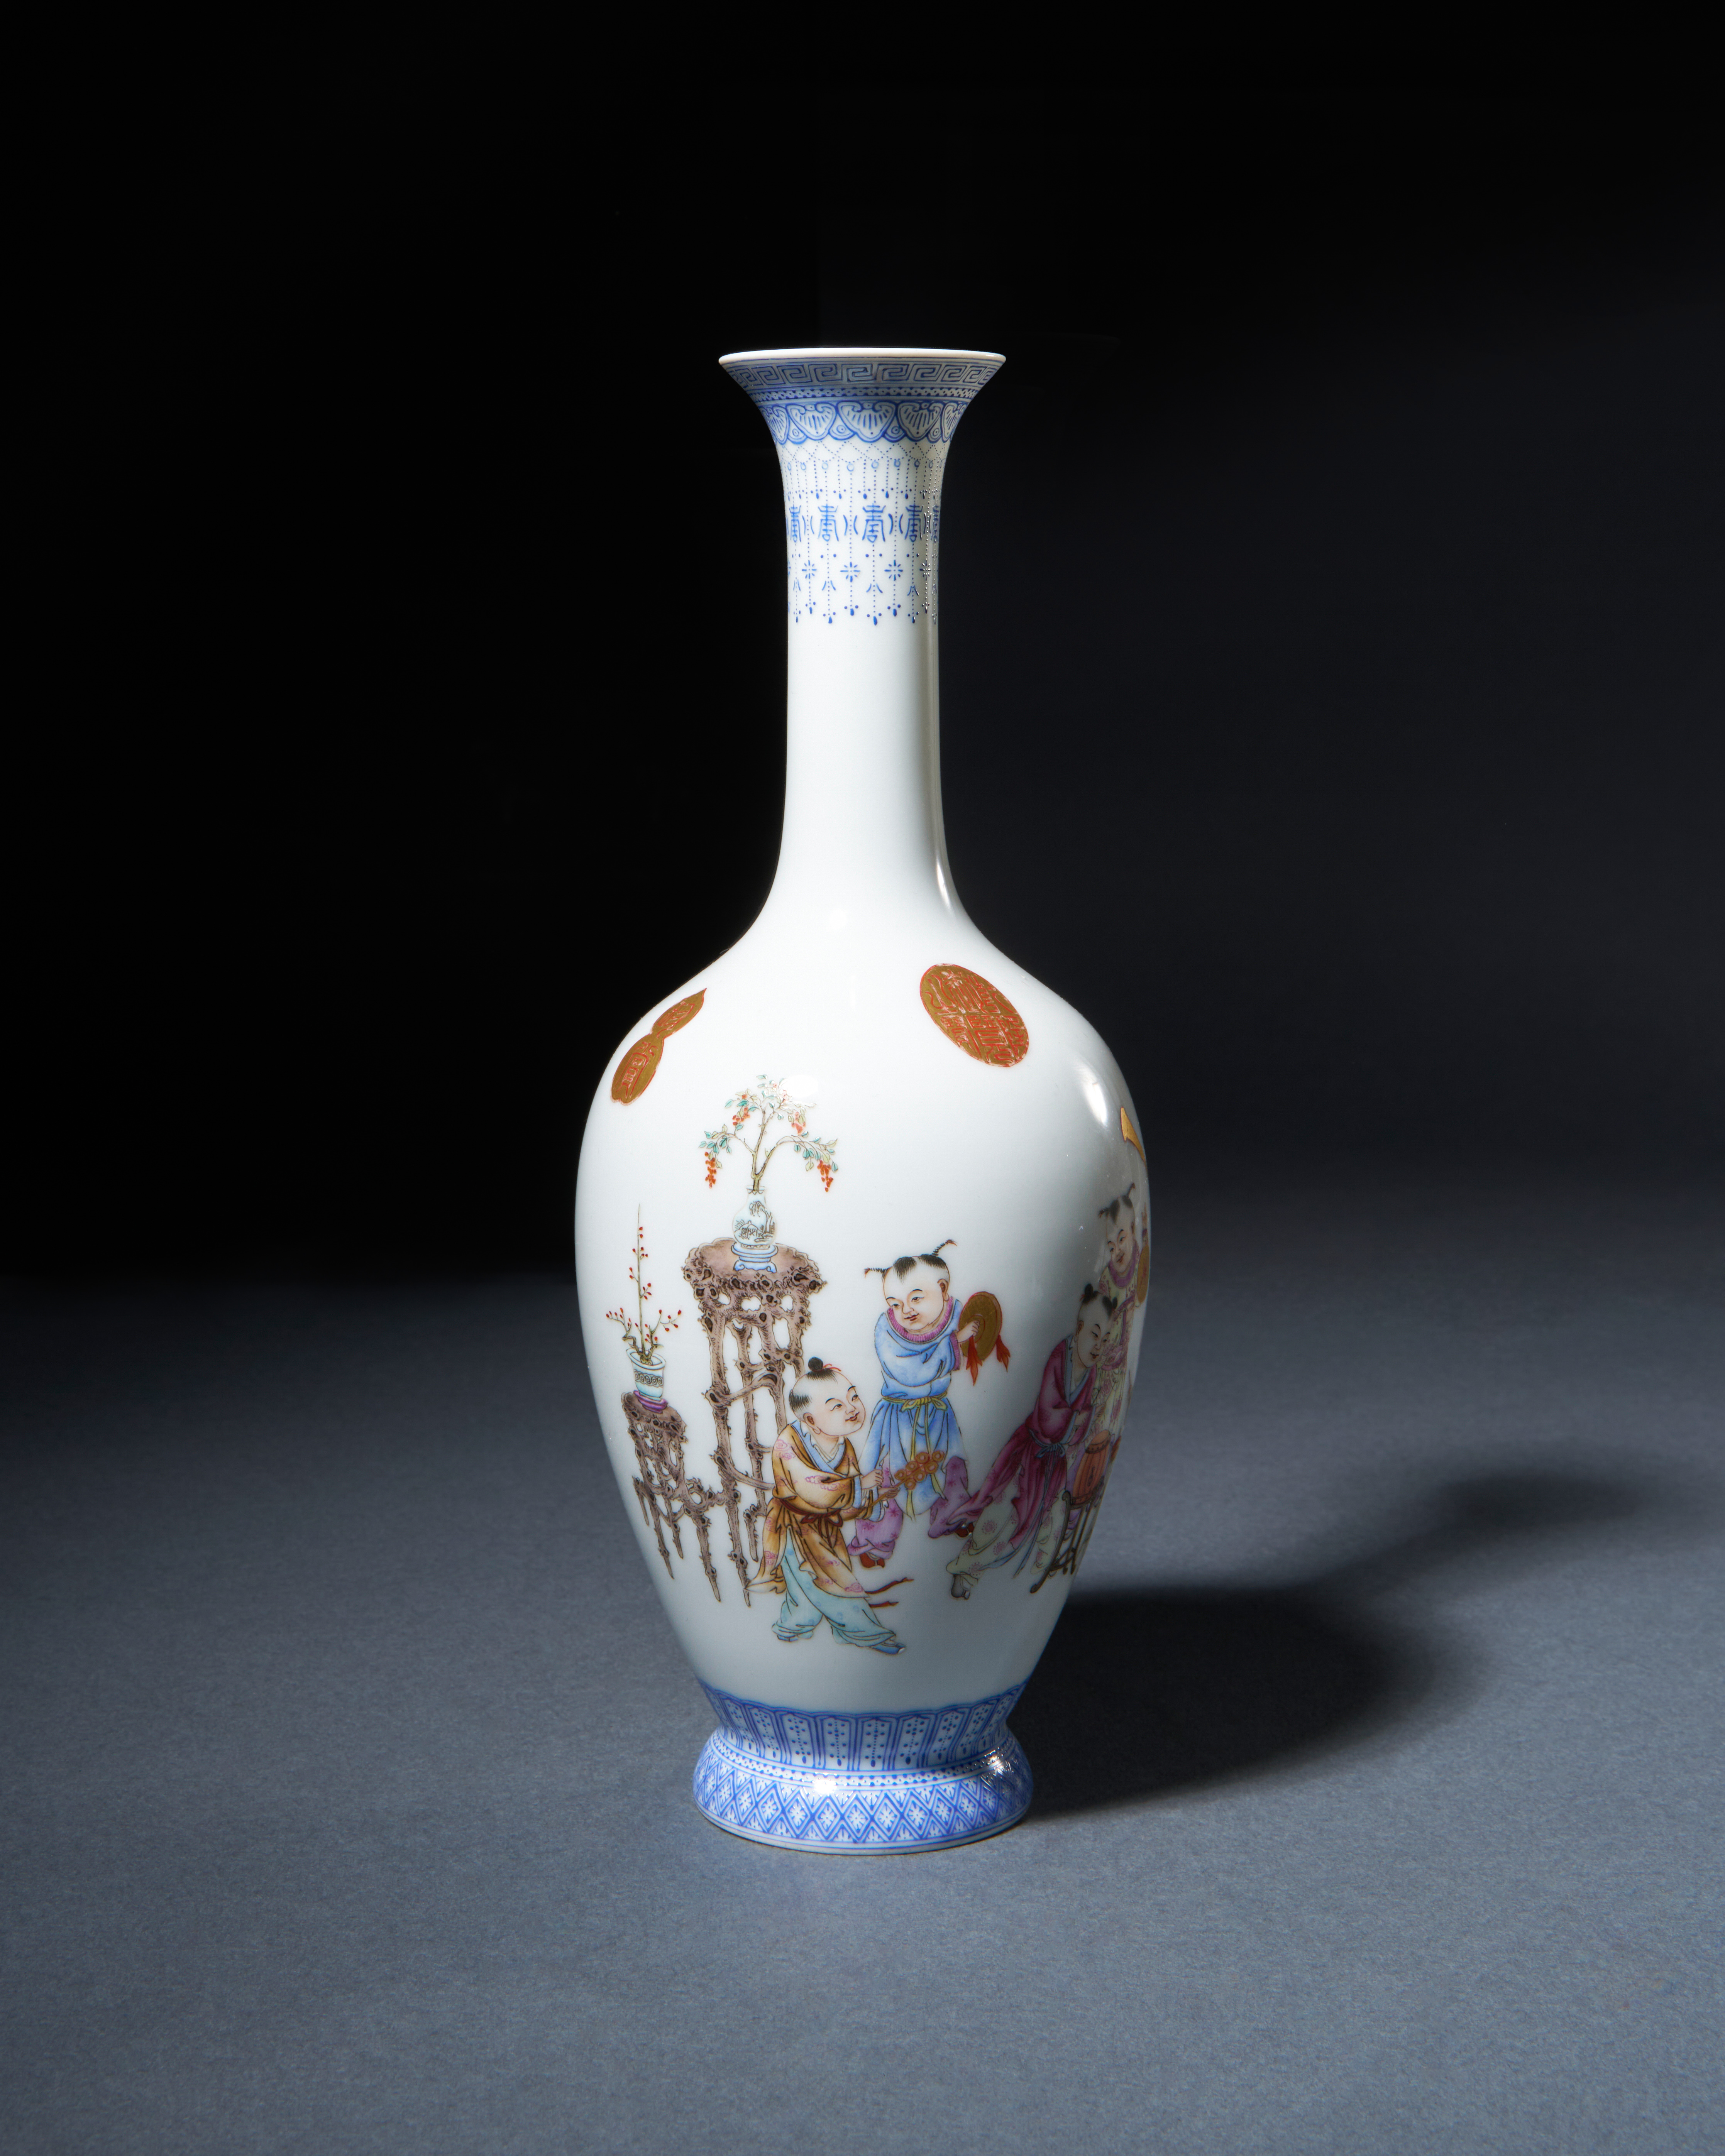 A FINE CHINESE FAMILLE ROSE VASE, QING DYNASTY OR EARLY REPUBLIC - Image 3 of 6